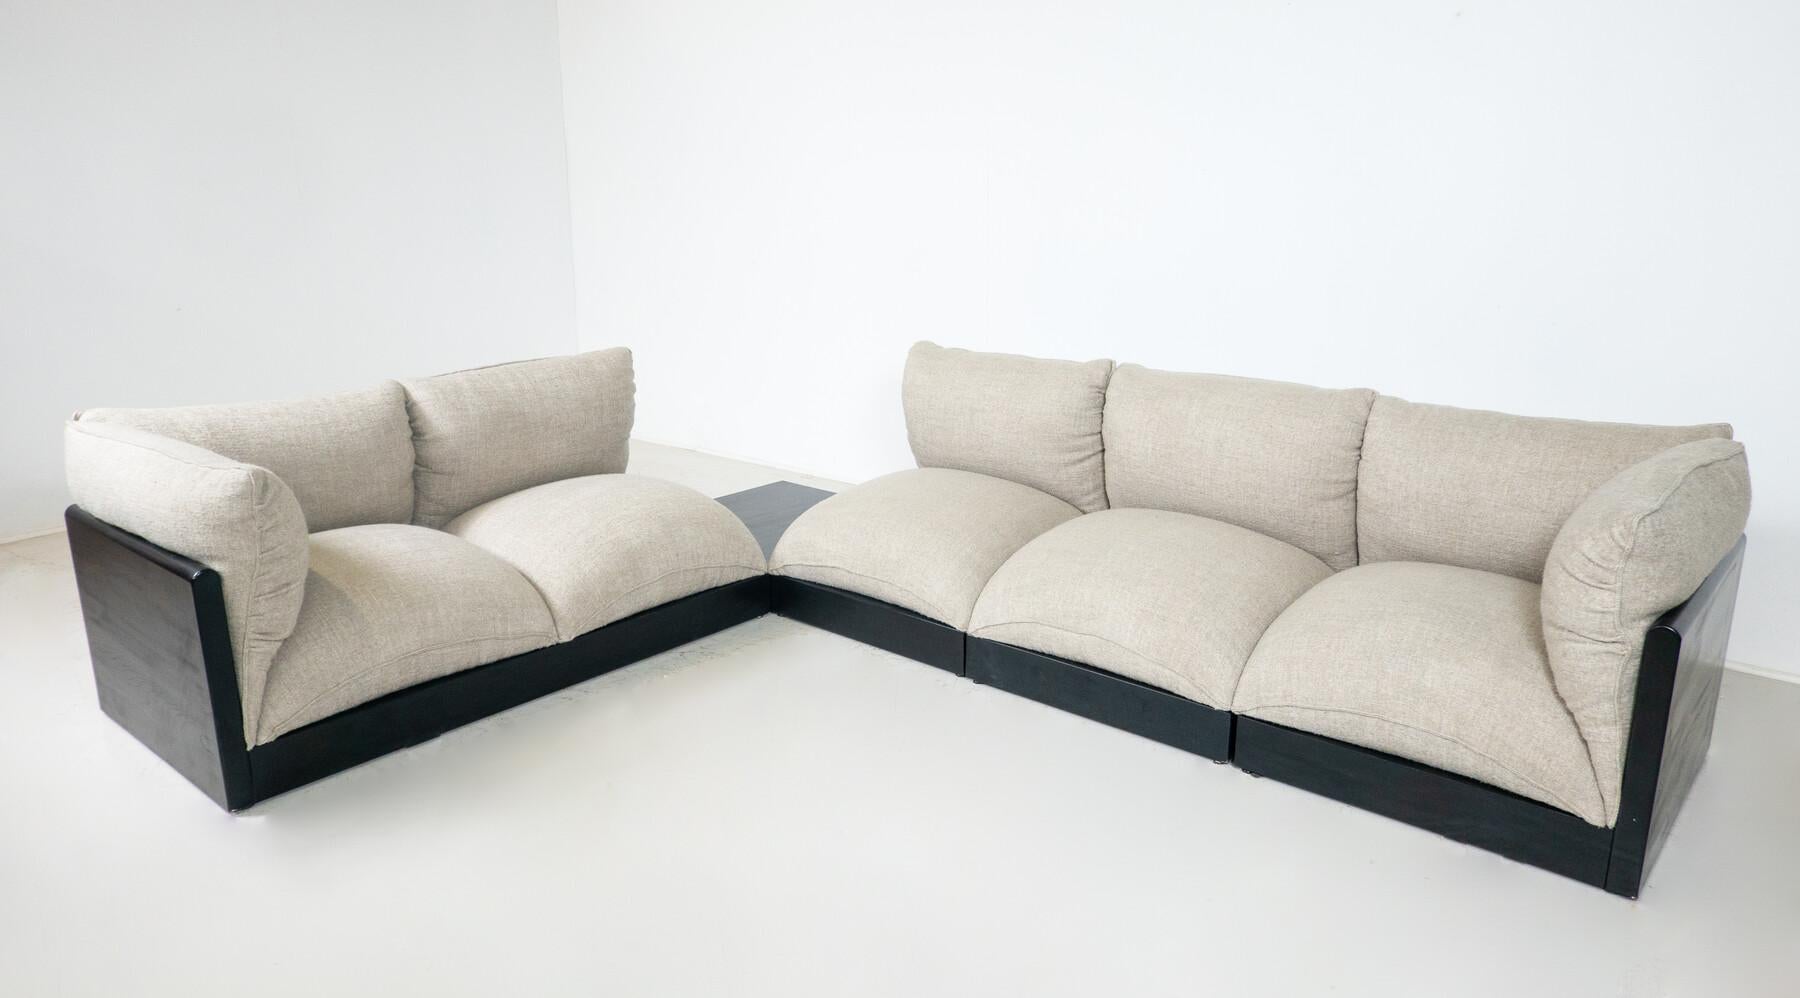 Blob Modular Sofa by Carlo Bartoli, italy, 1970s - New Upholstery

dimensions : 

- 68 W x 72,5 D x 68H cm 

-With armrests : 73,5 W 

Seat height : 33 